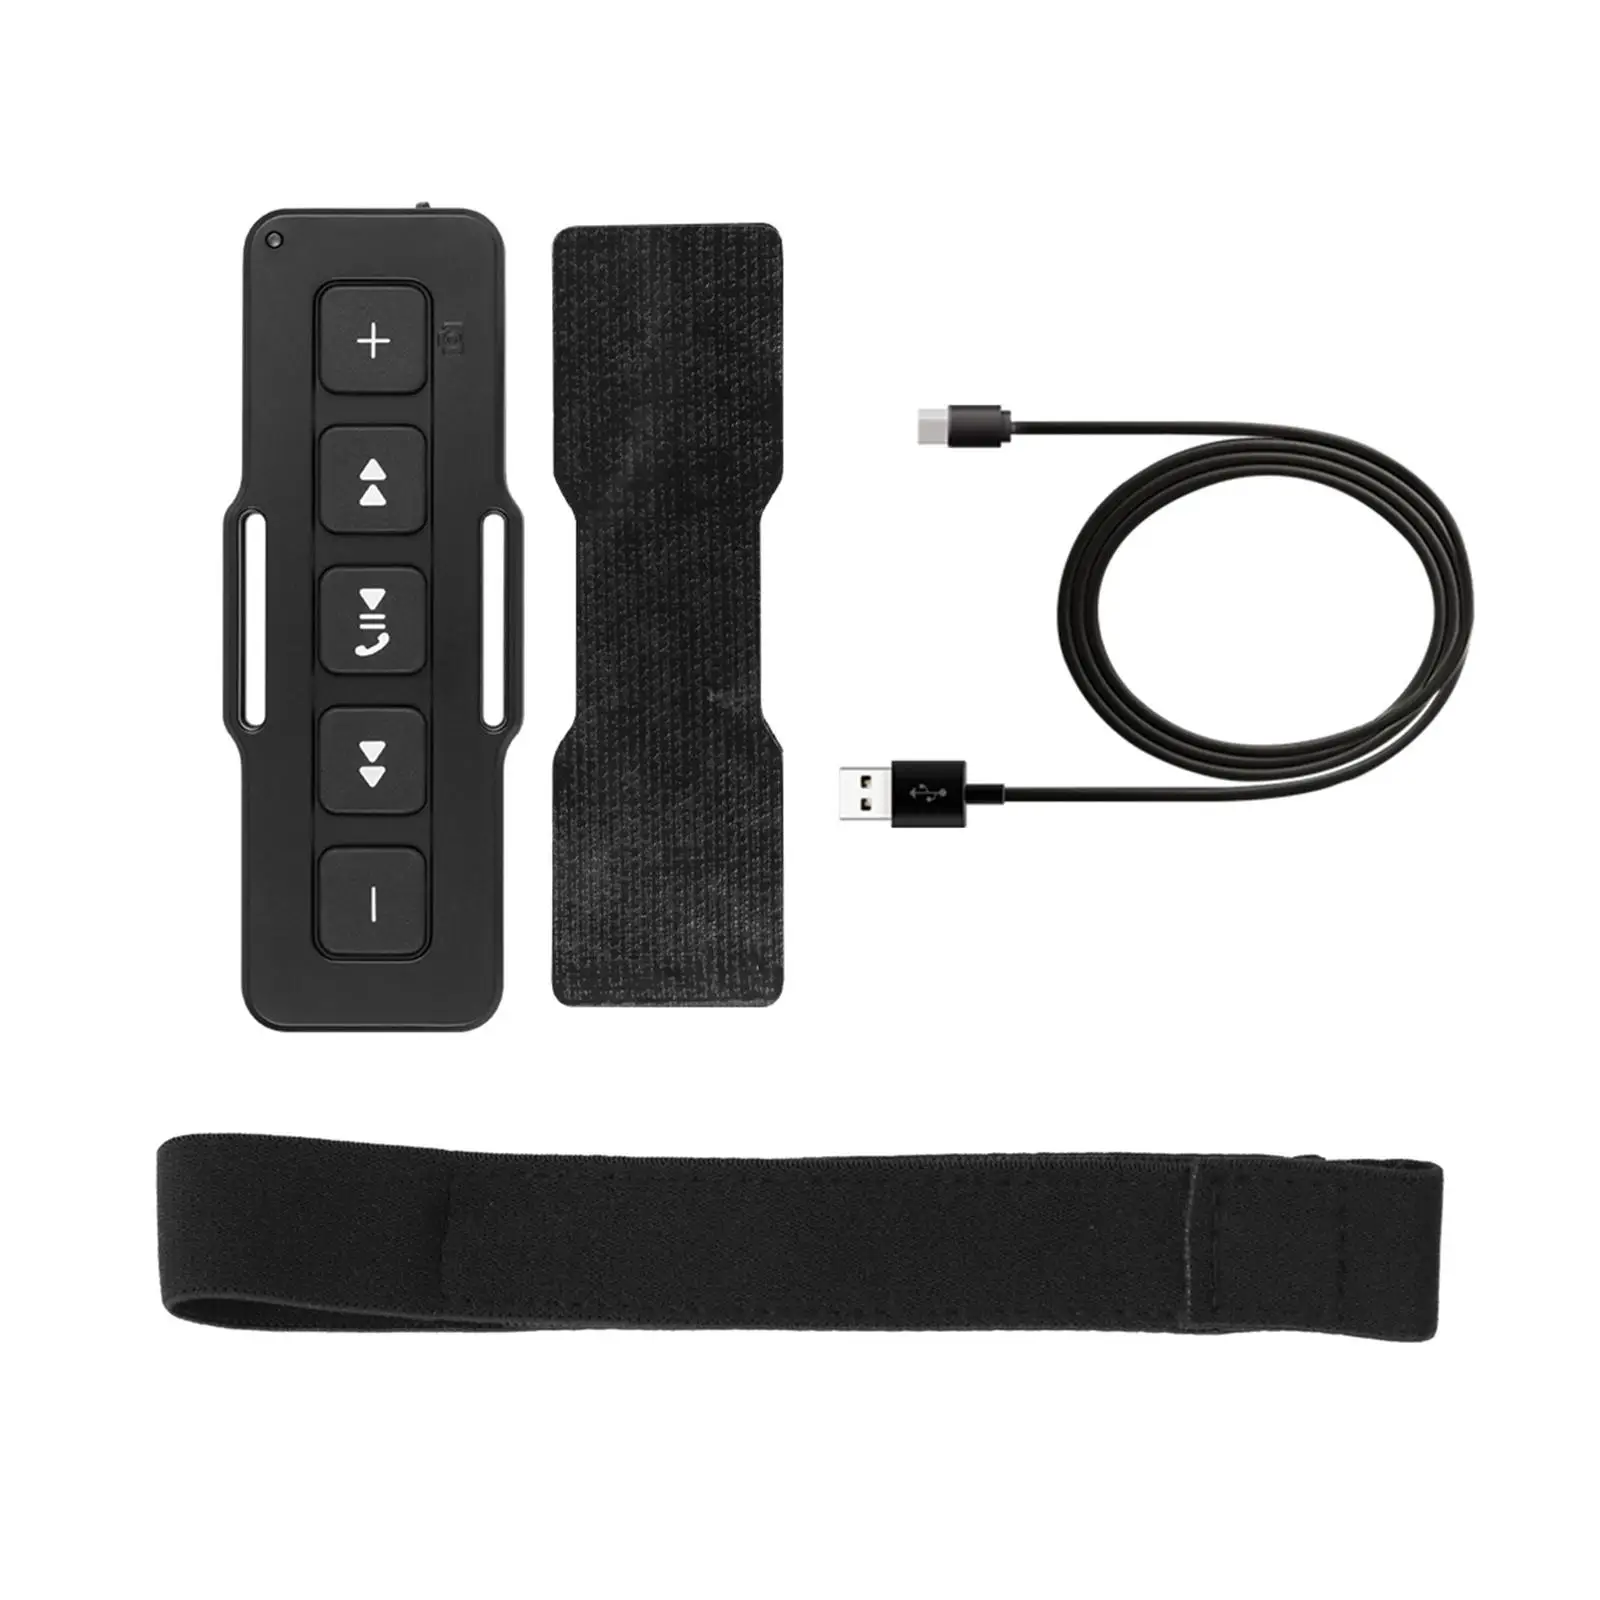 Motorcycle Remote Controller 5 Button Waterproof Compact for Outdoors